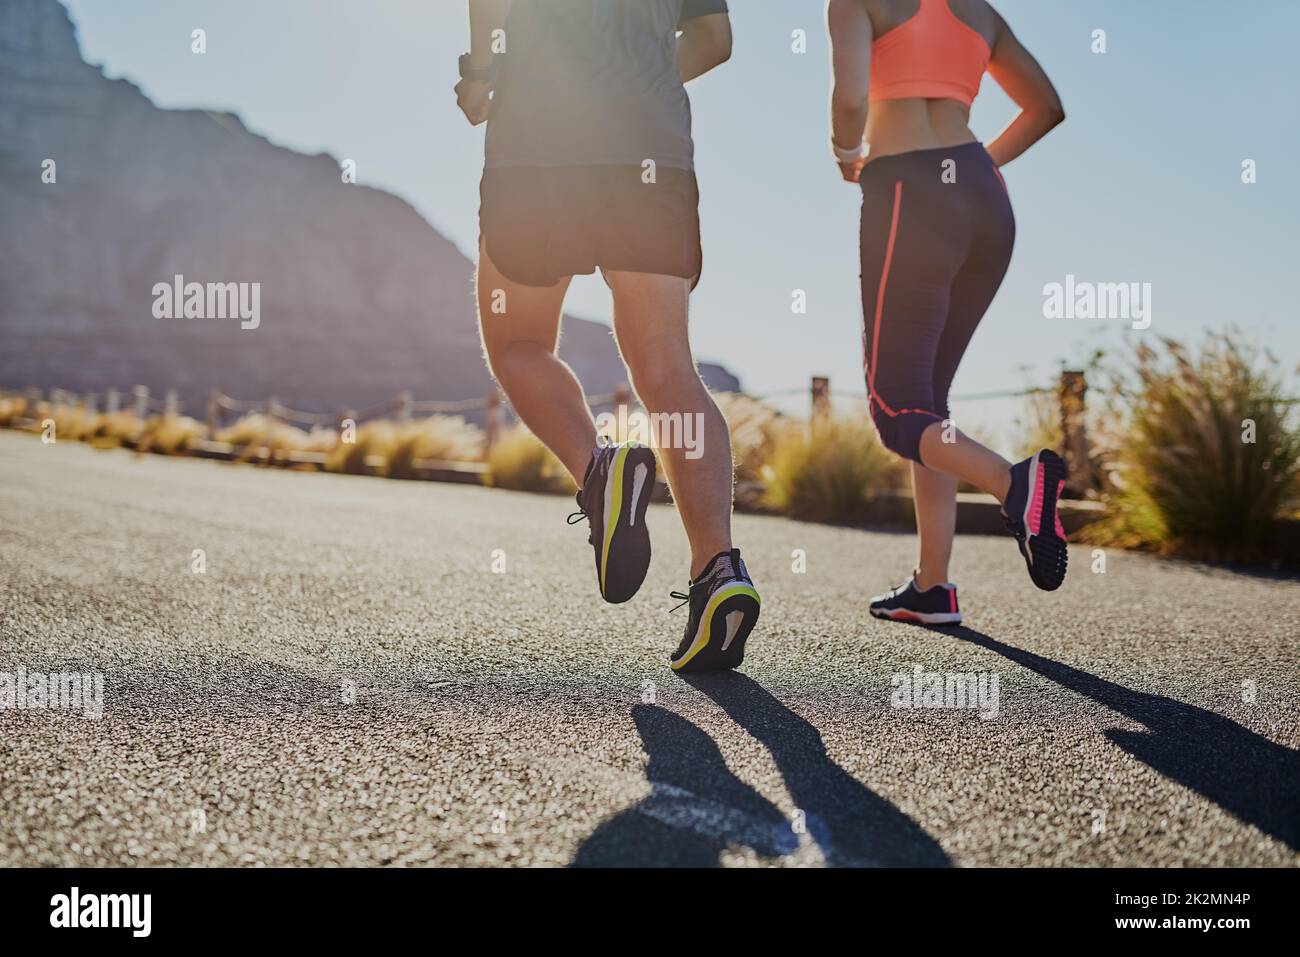 Rearview shot of two unrecognizable young people running on the road. Stock Photo